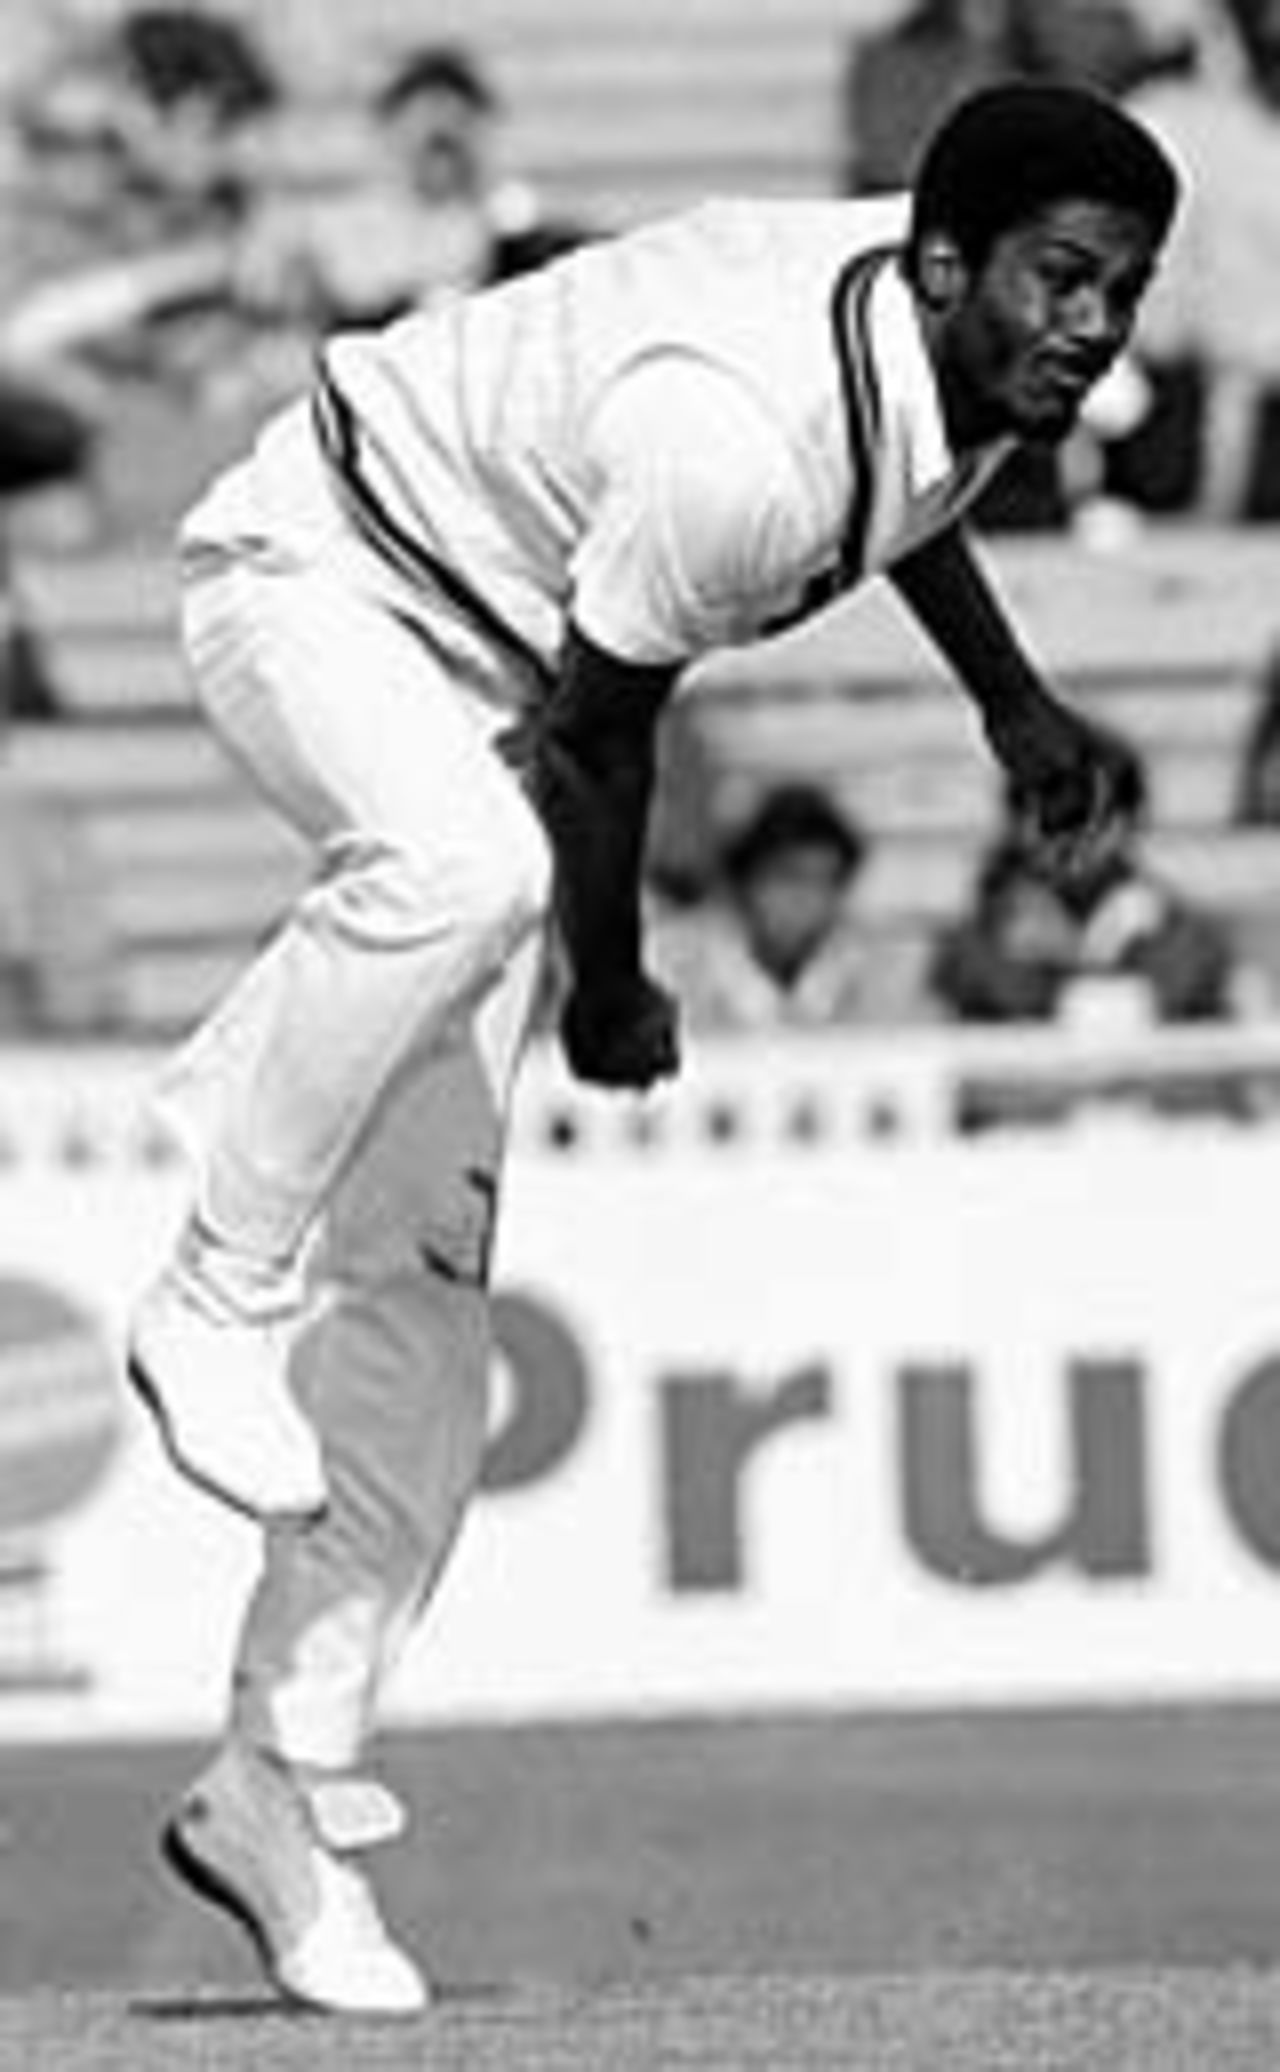 Michael Holding lets fly